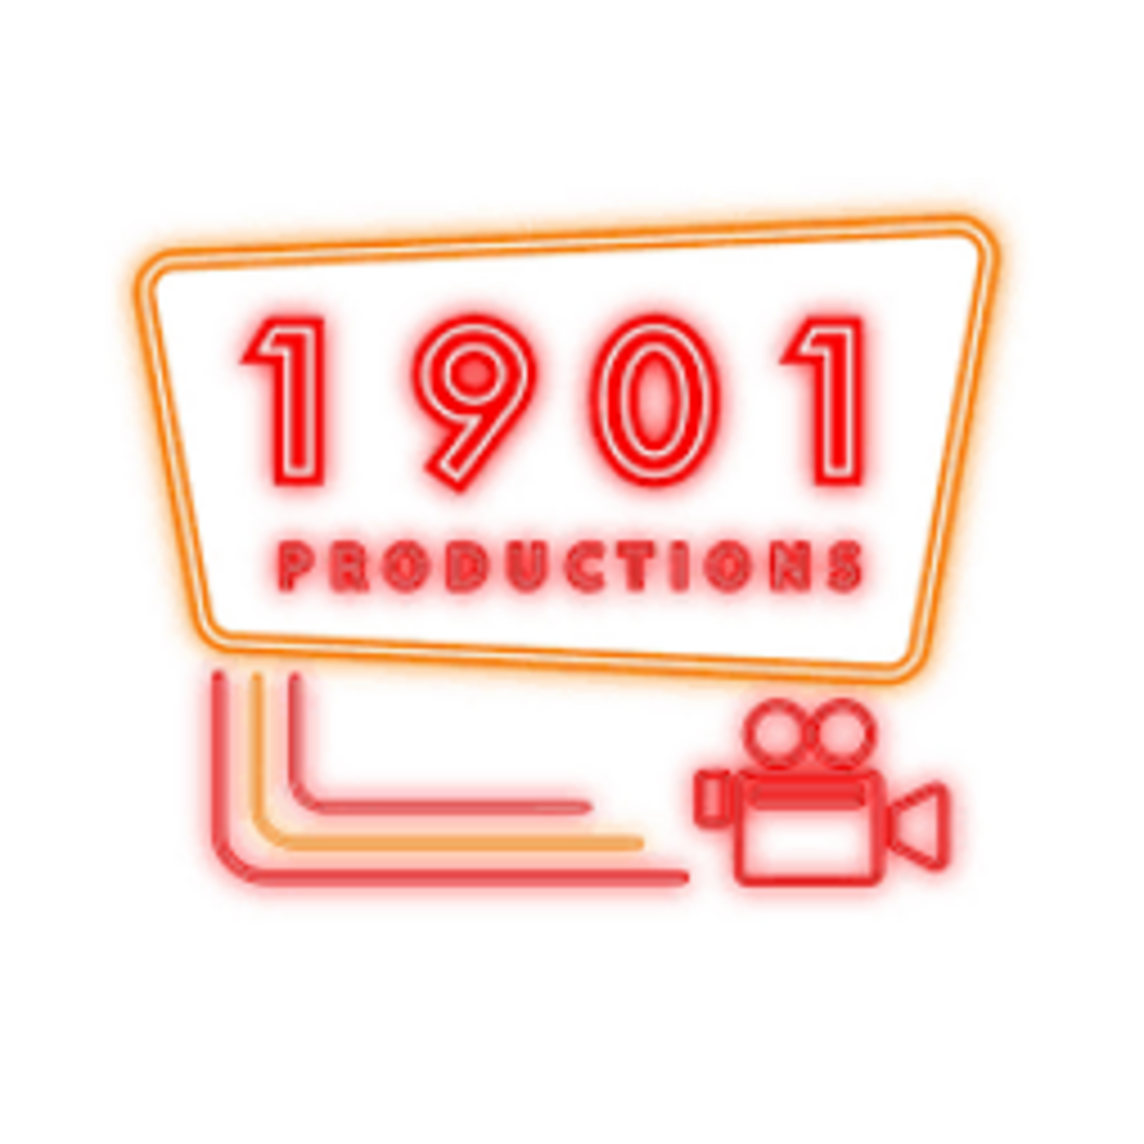 1901 productions